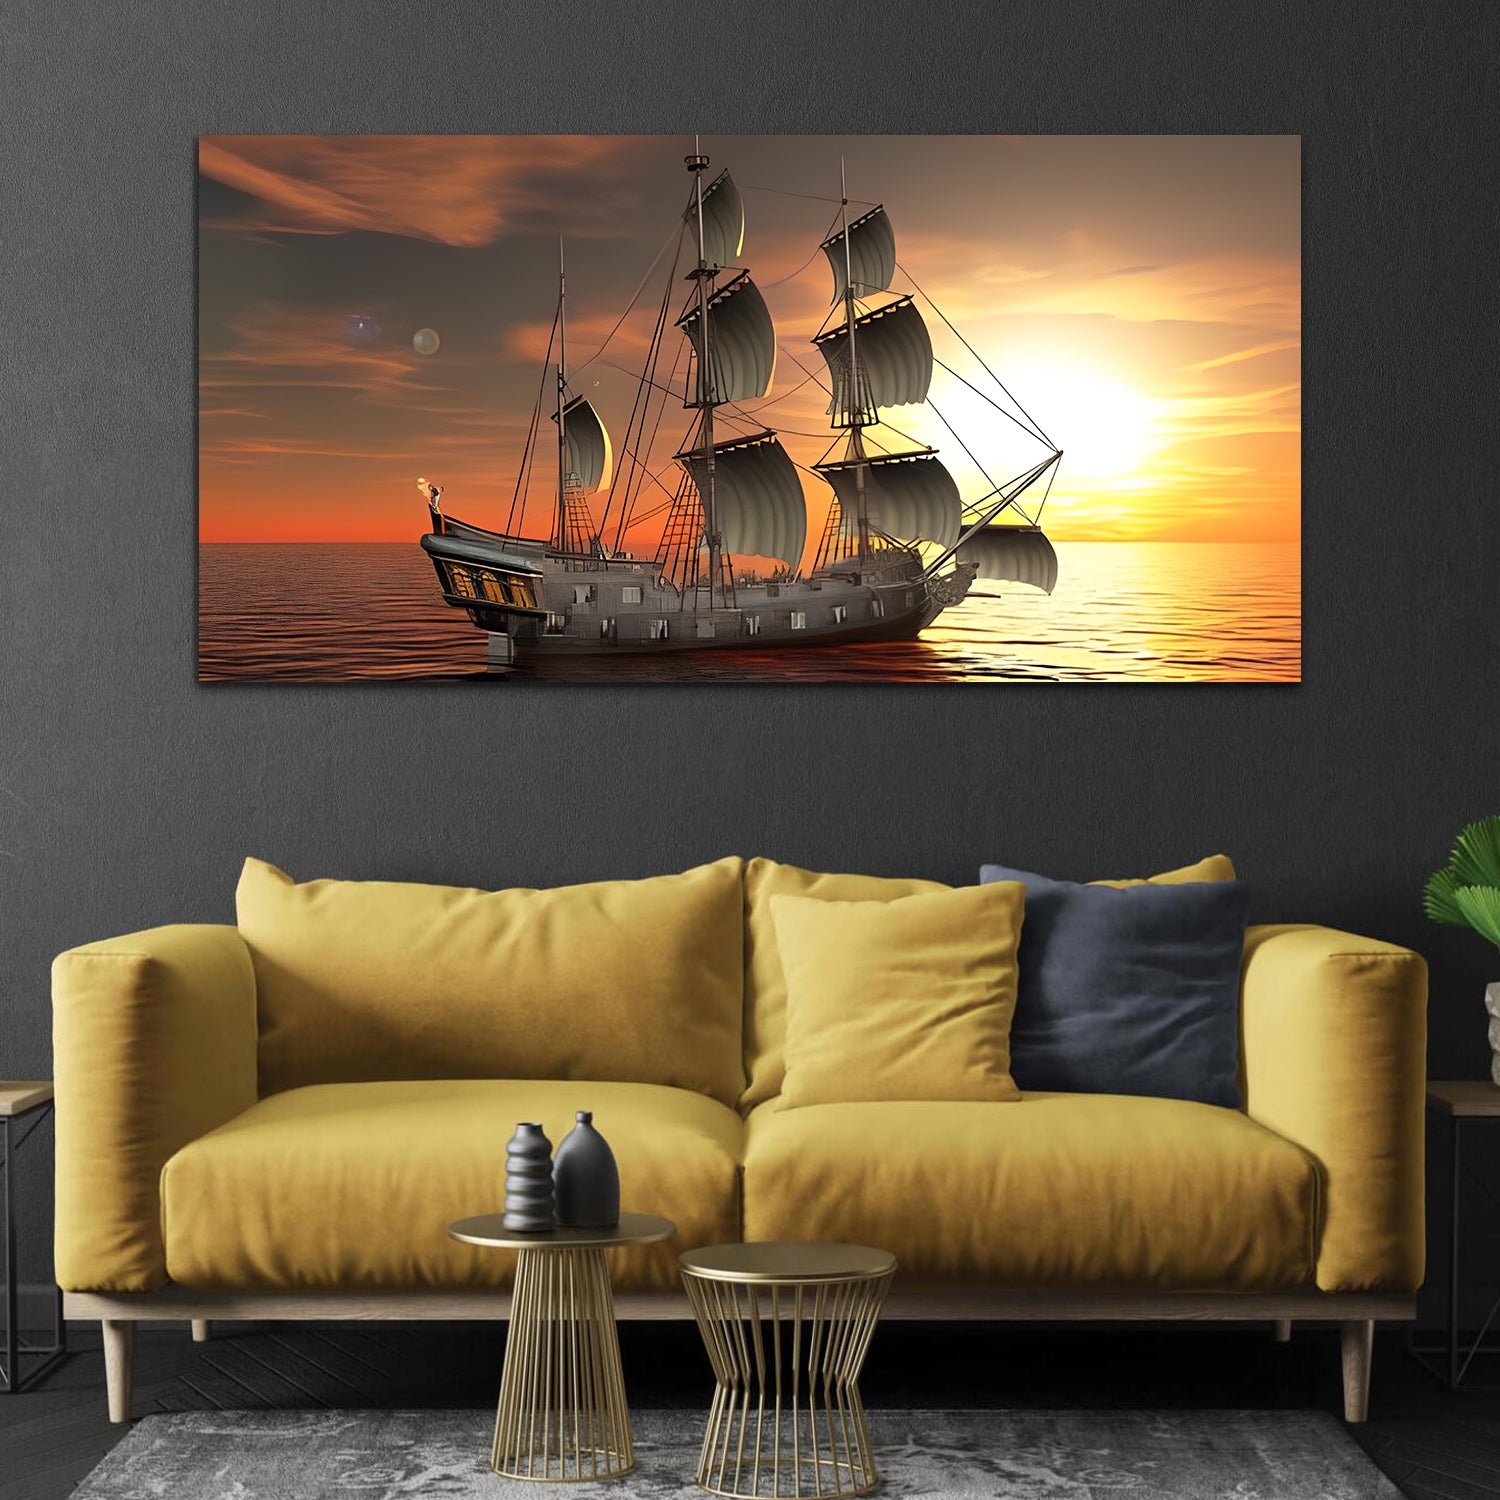 Yellow & Grey Boat Evening Canvas Painting Wall Art